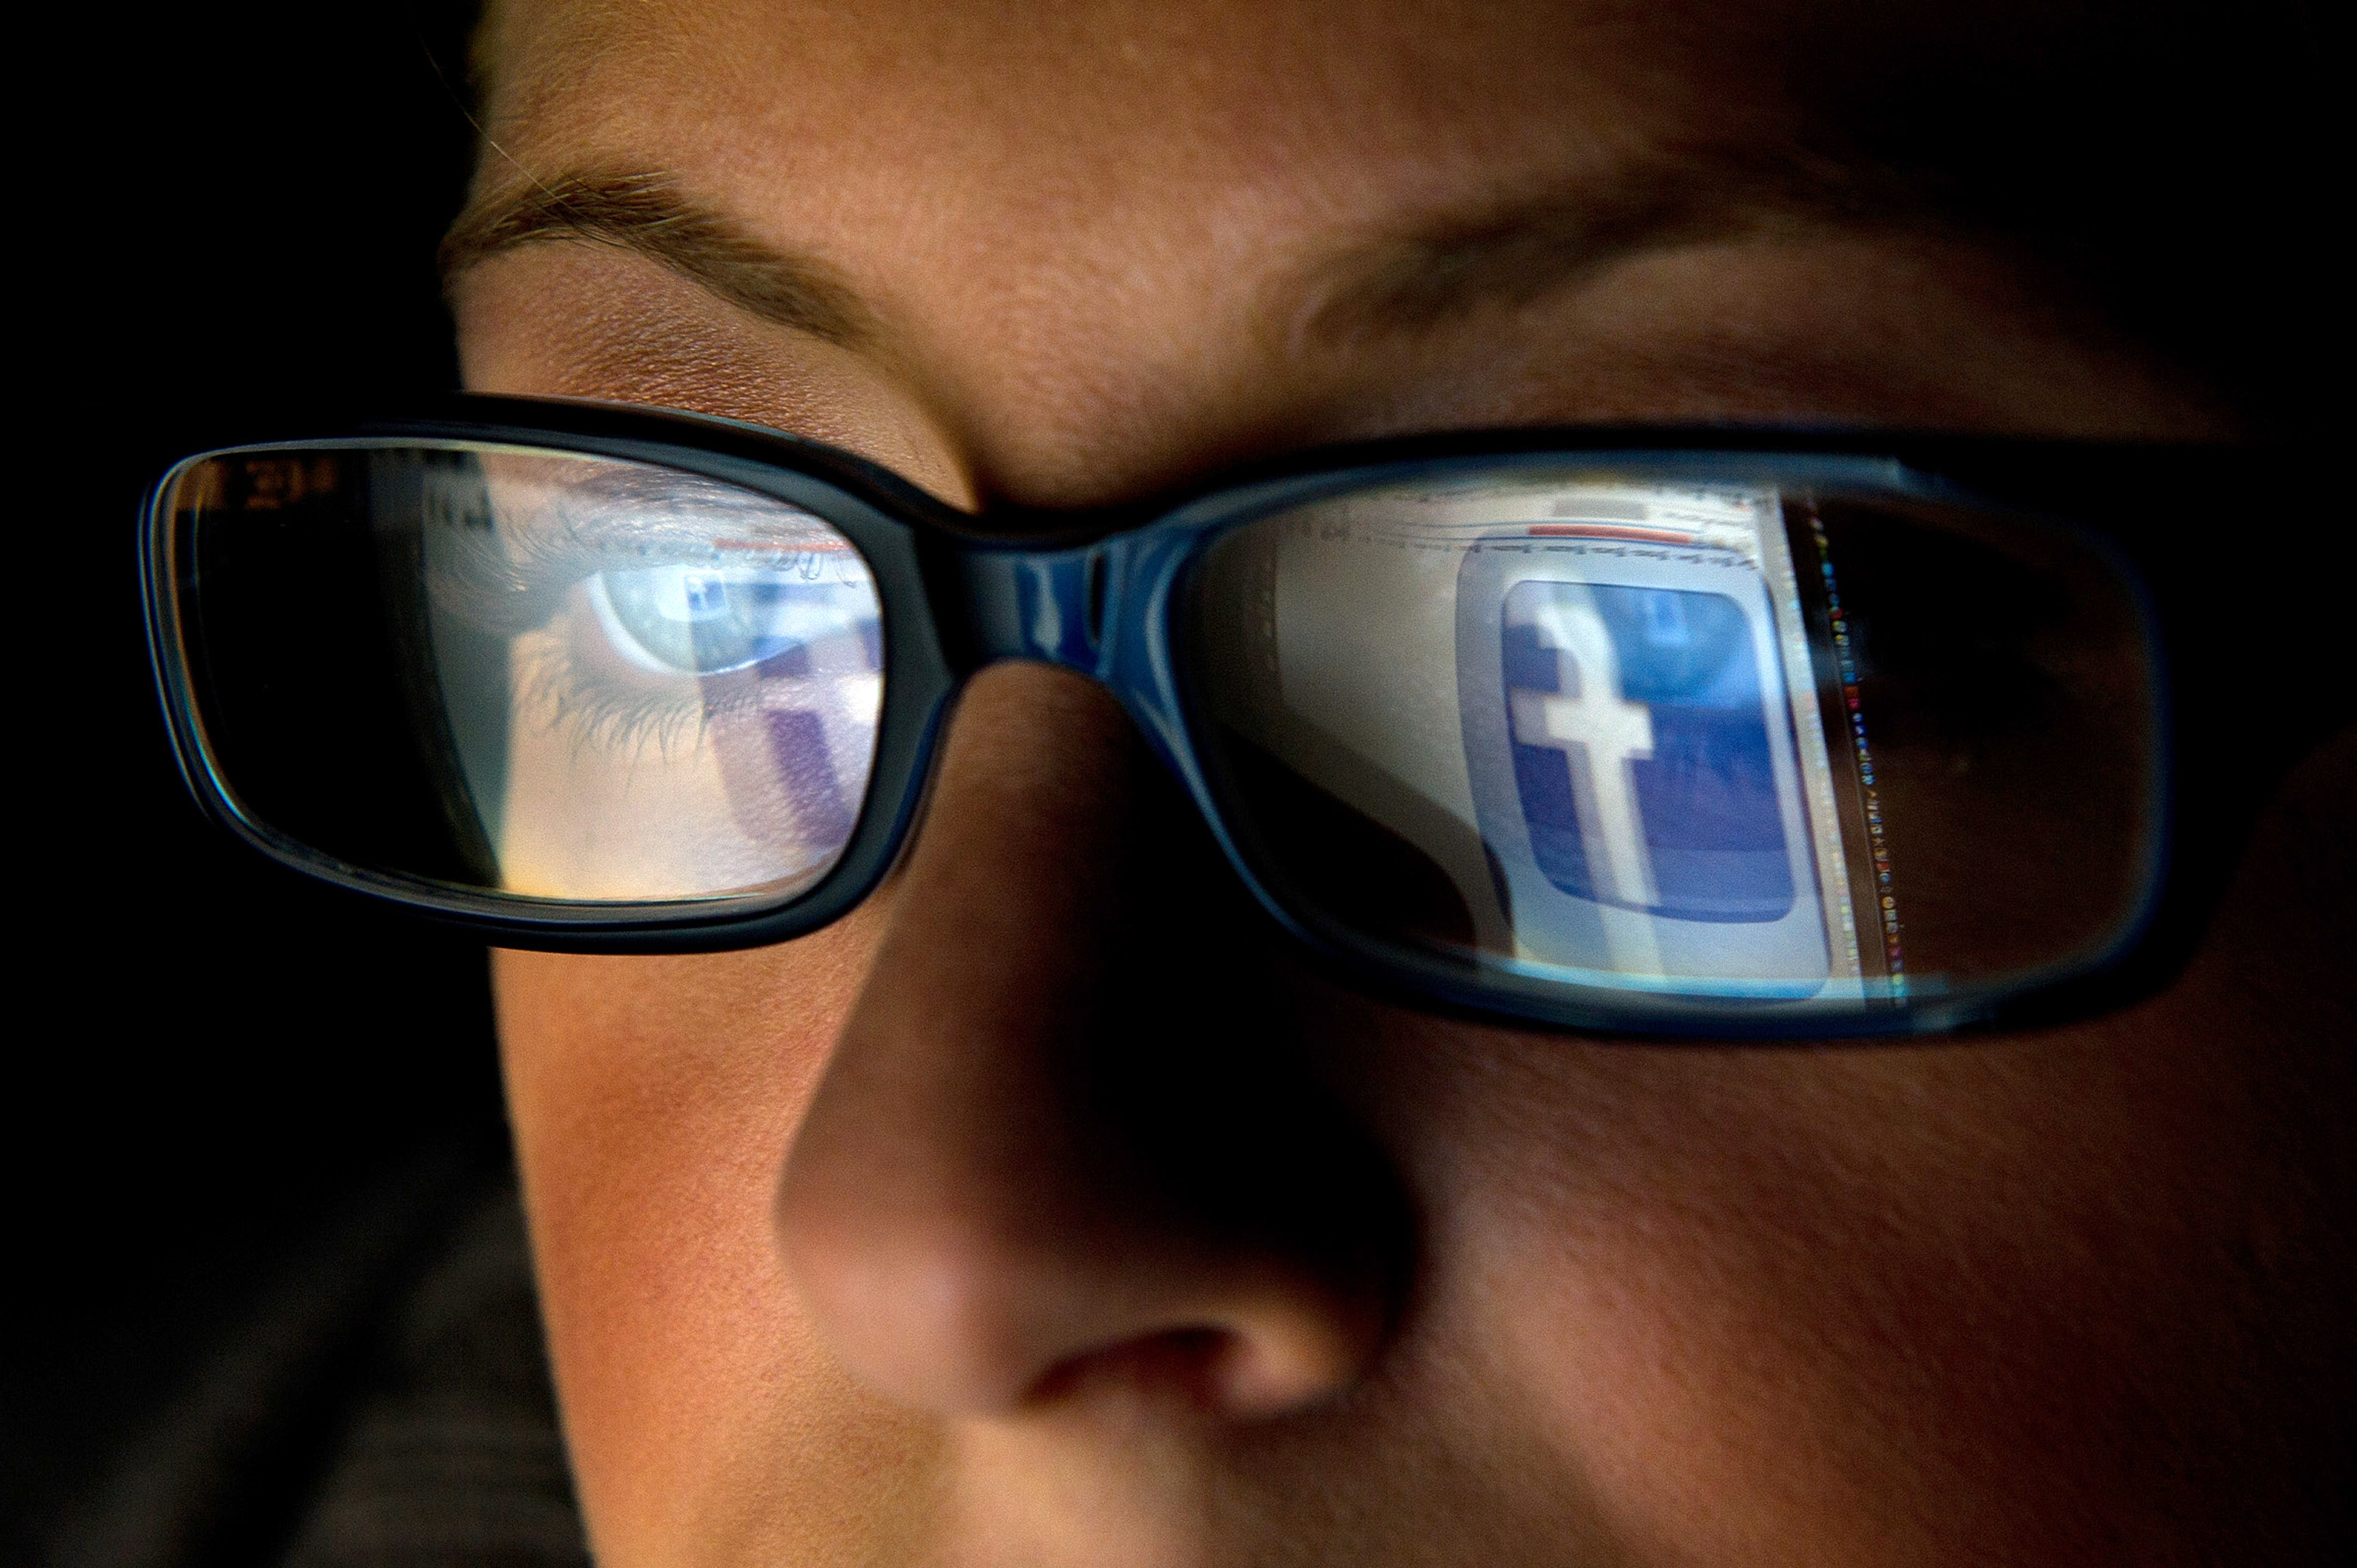 In this file photo the Facebook Inc. logo is reflected in the eyeglasses of a user in this arranged photo in San Francisco, California, U.S., on Wednesday, Dec. 7, 2011. (Bloomberg&mdash;Bloomberg via Getty Images)